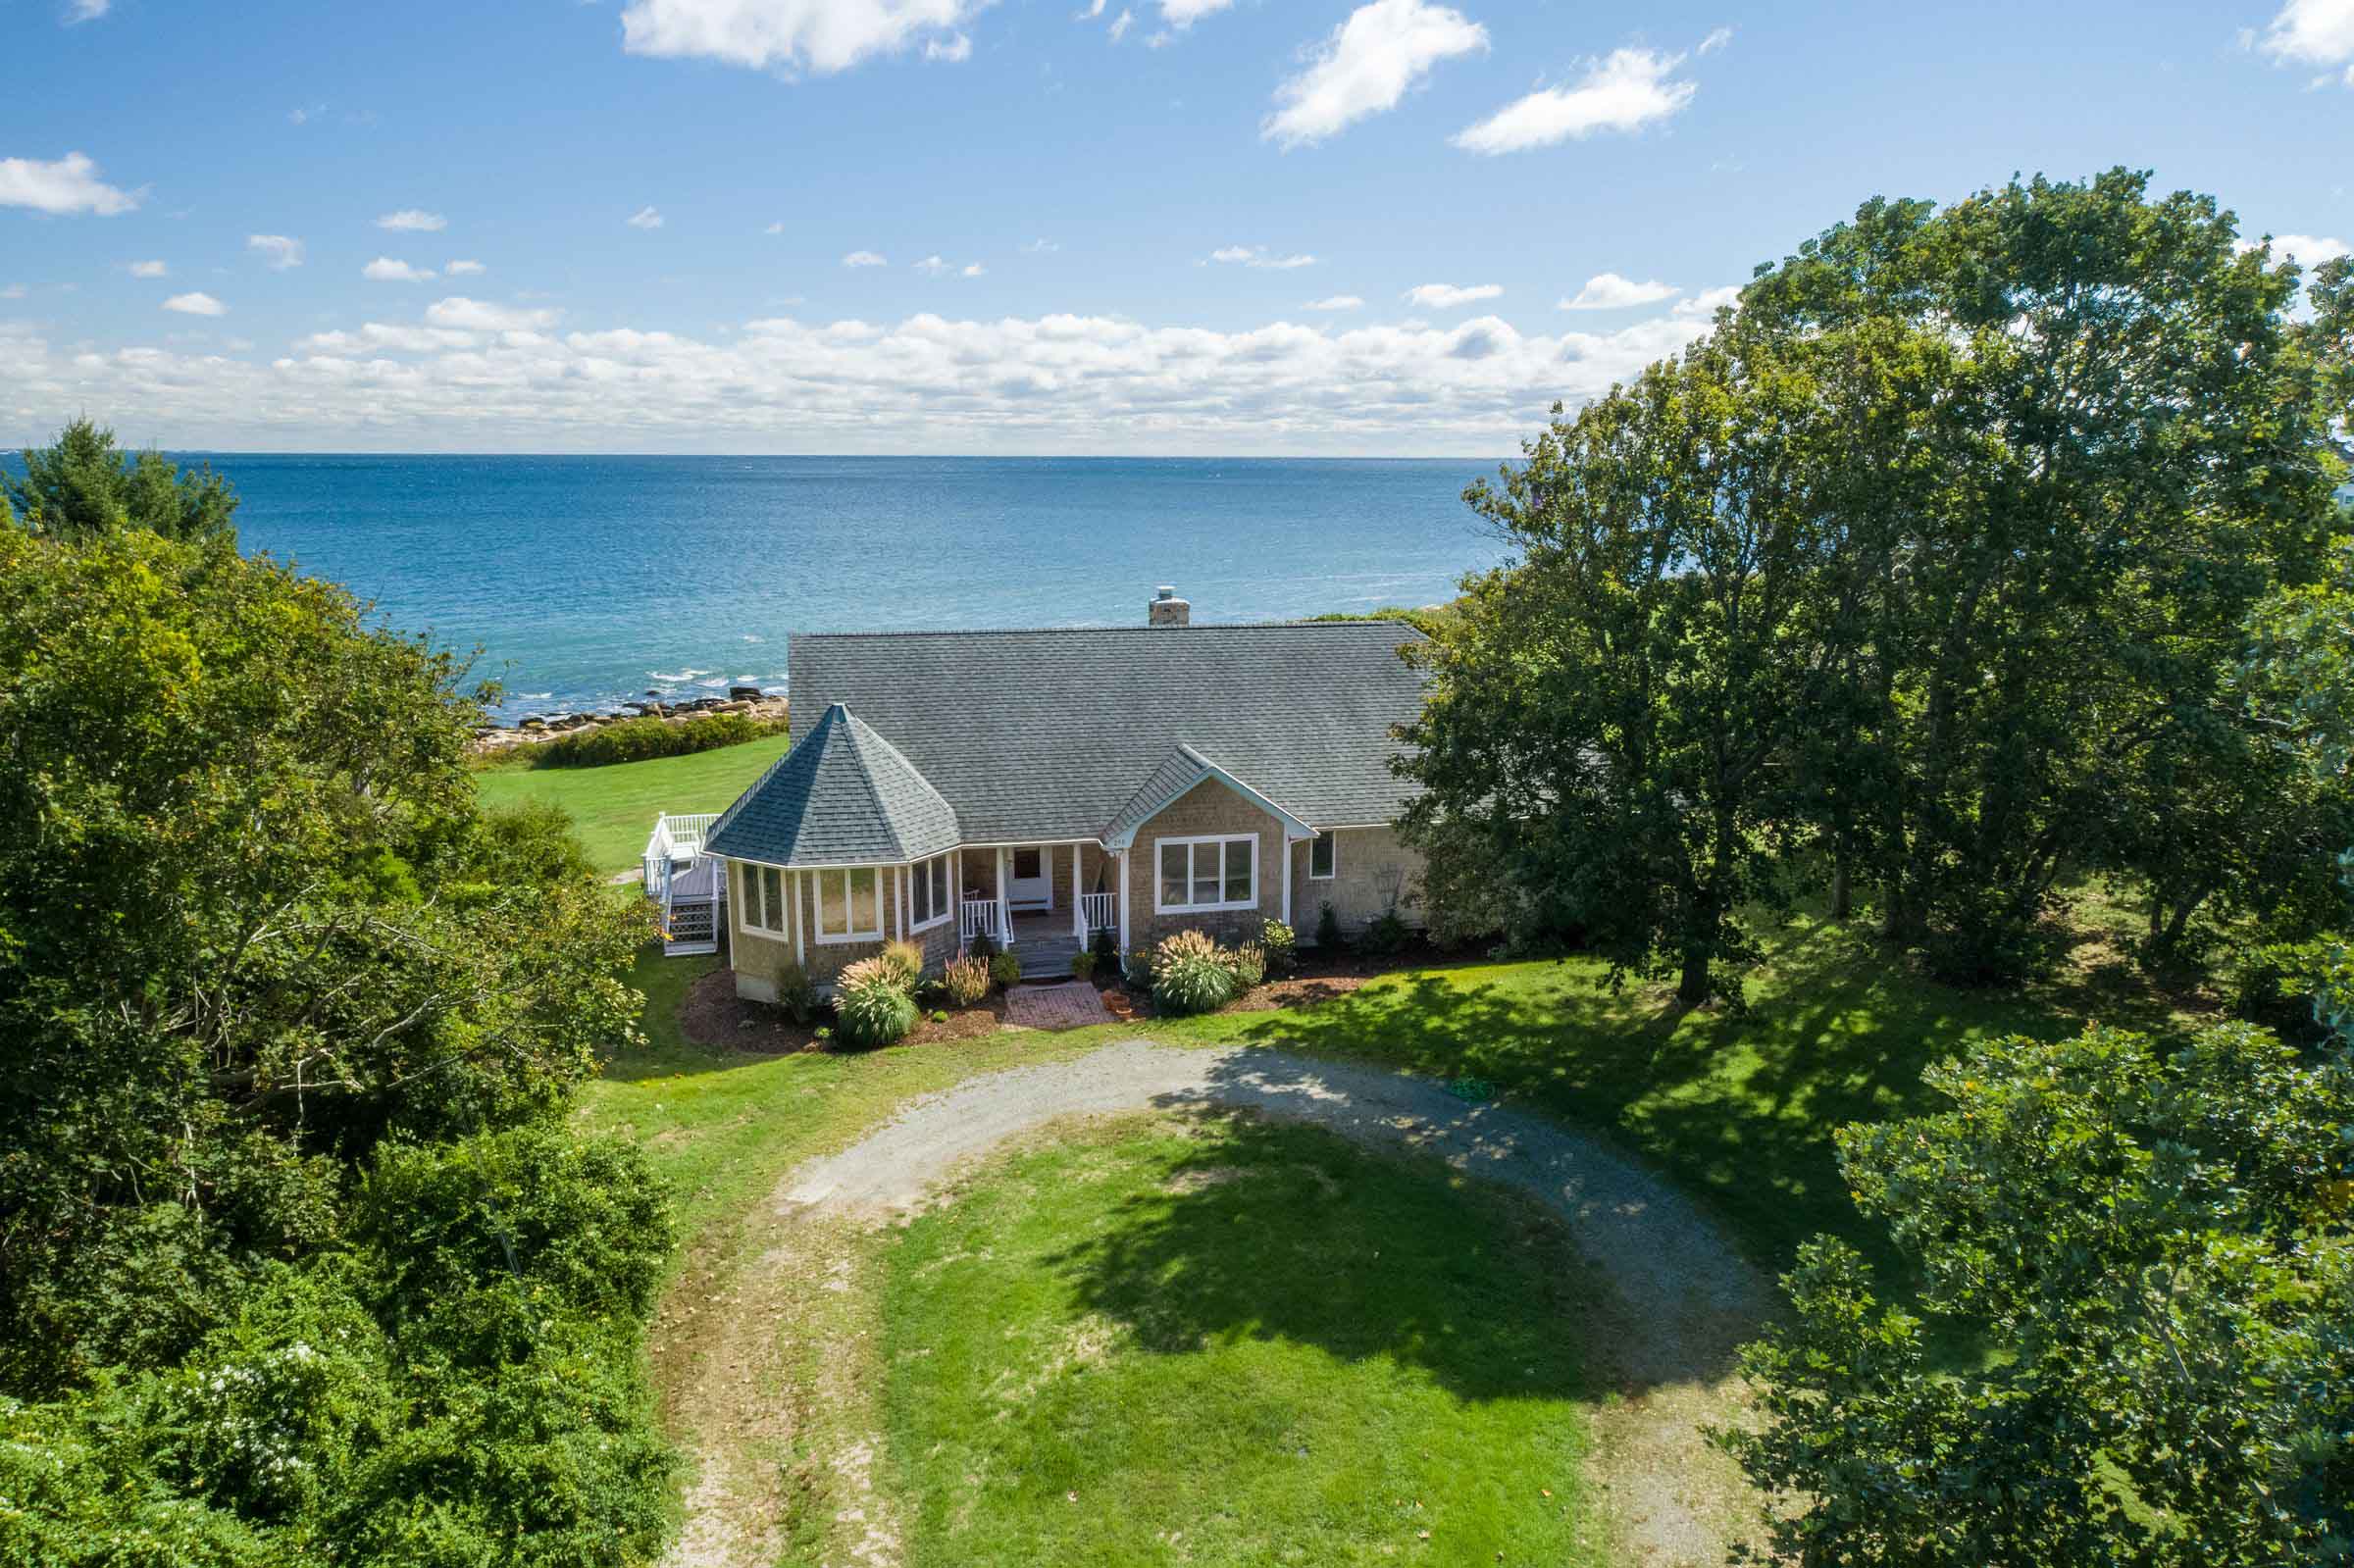 OCEAN ROAD RETREAT SELLS FOR $400K OVER ASKING PRICE, MARKING HIGHEST SALE IN NARRAGANSETT THIS YEAR*